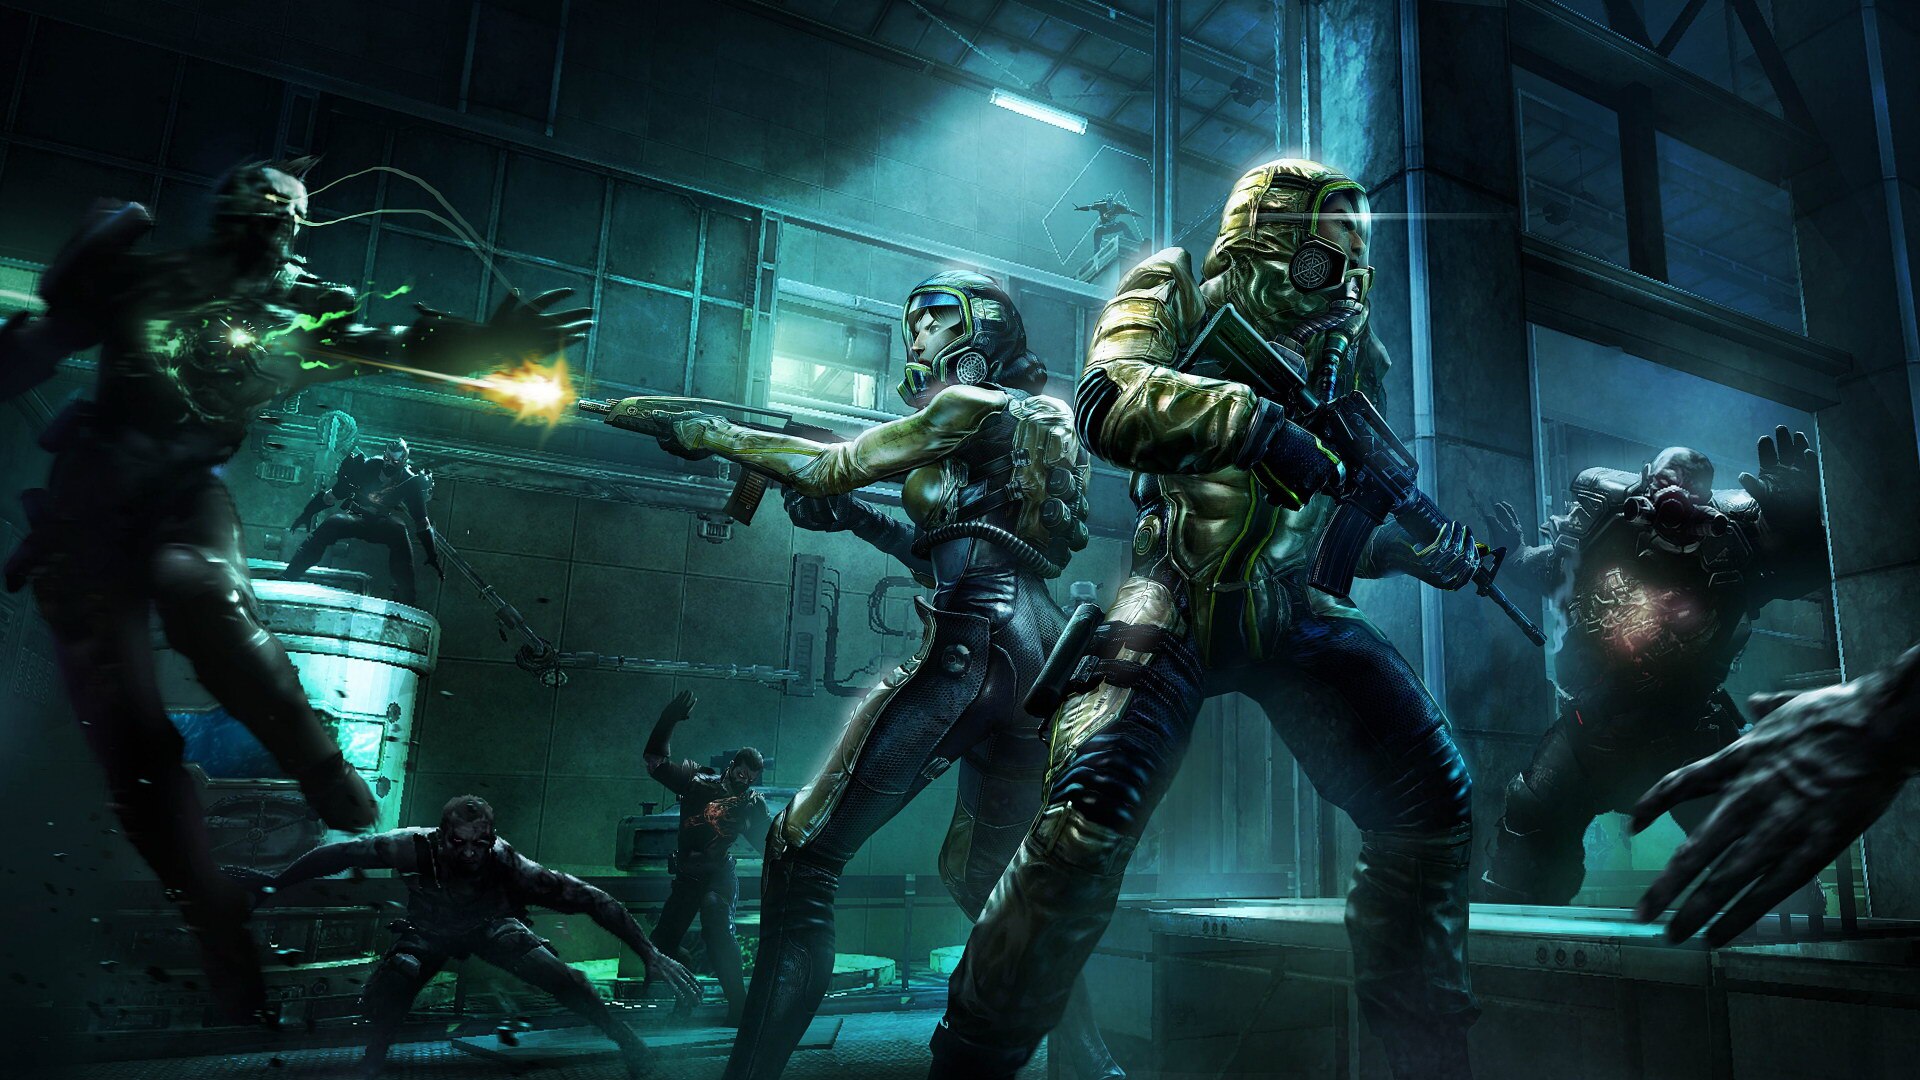 SOMA Has Been Inspired By Doom 3, Bioshock, Spec Ops: The Line